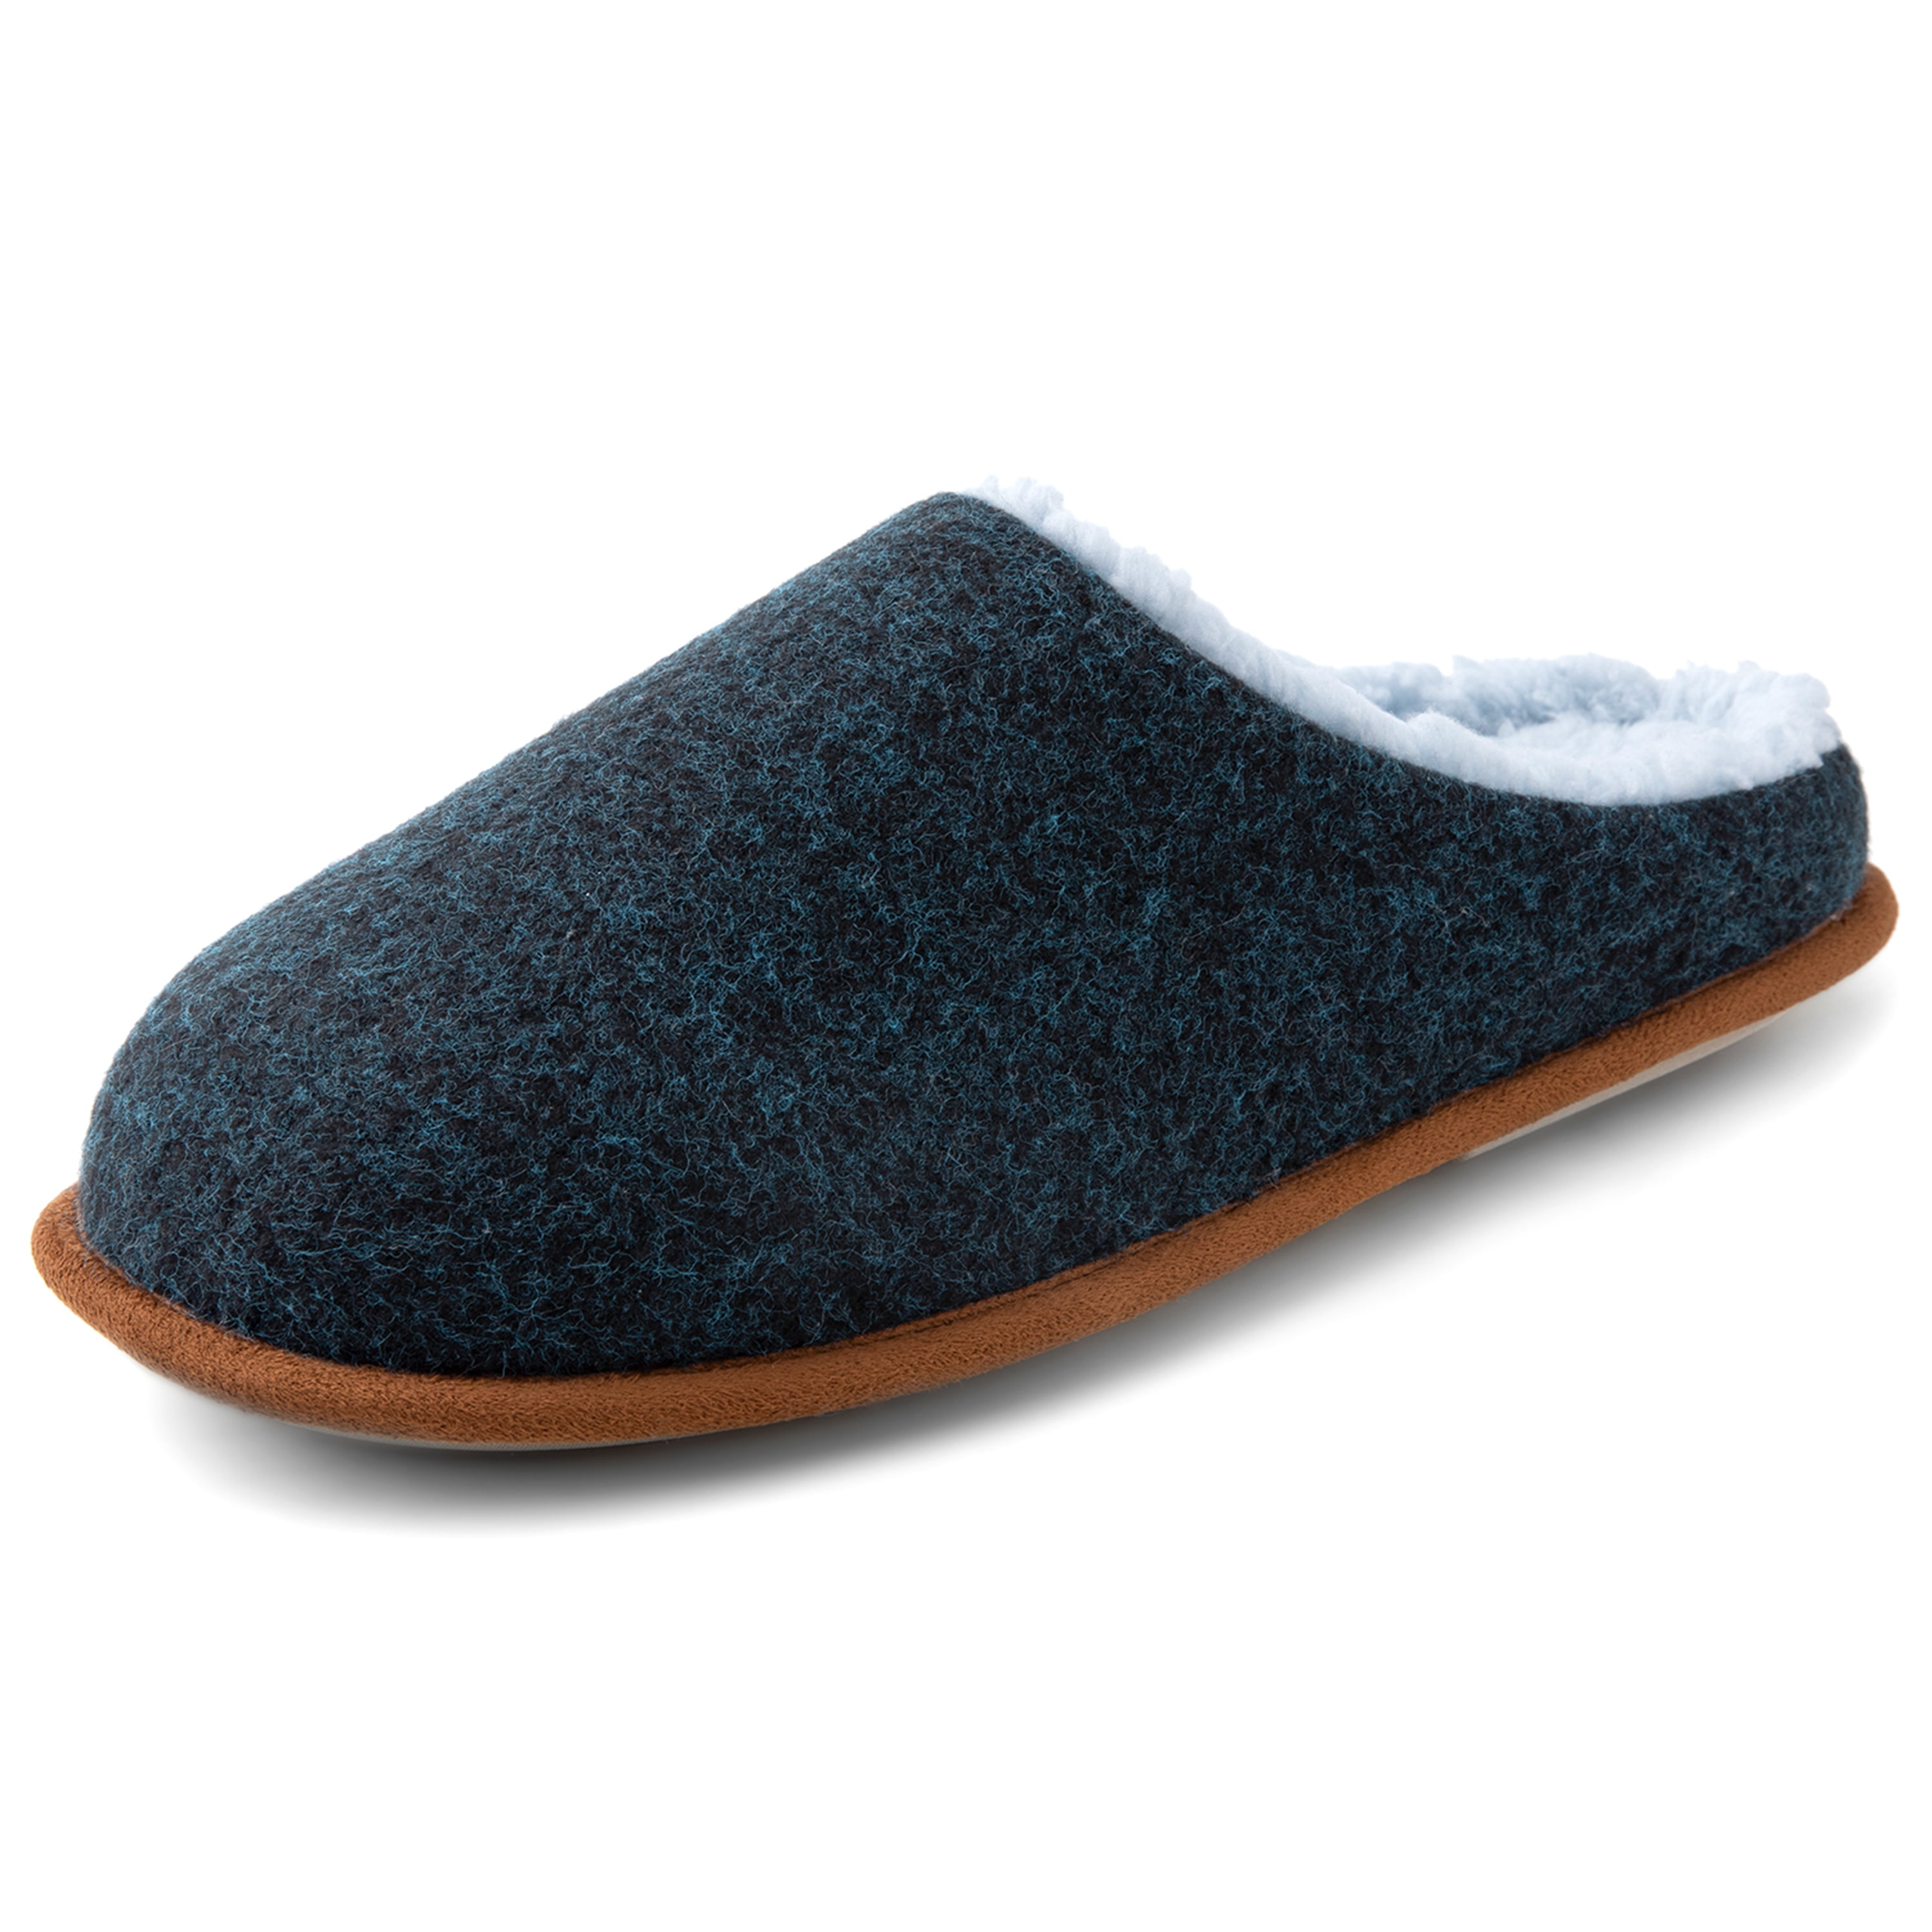 mens washable house slippers